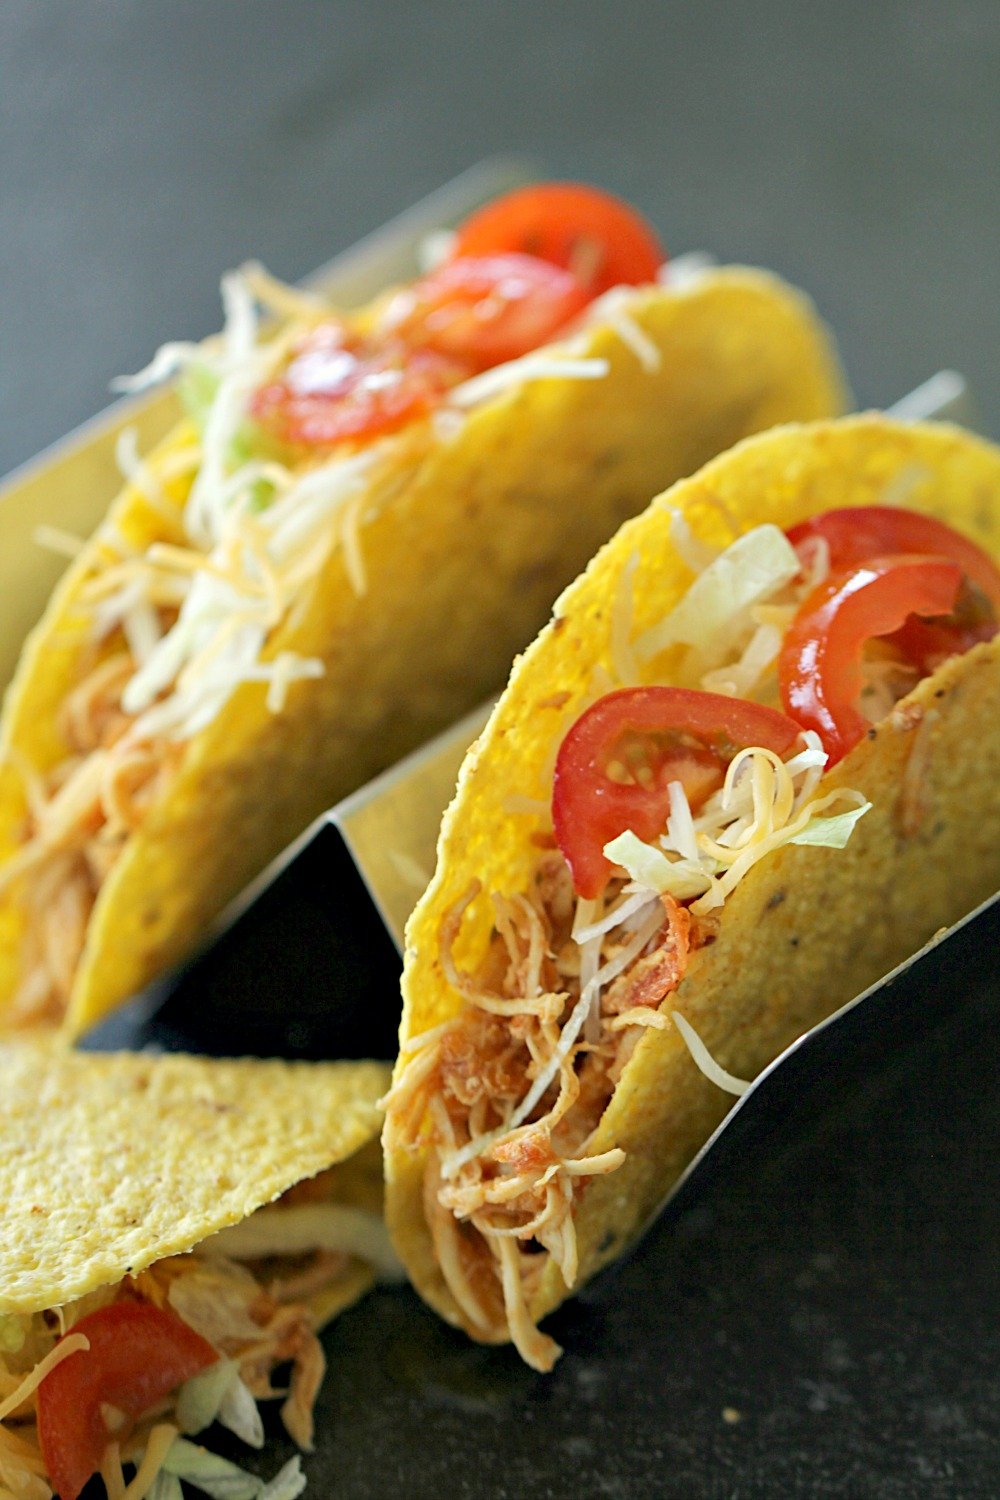 3-Ingredient Slow Cooker Chicken Tacos from Six Sisters' Stuff